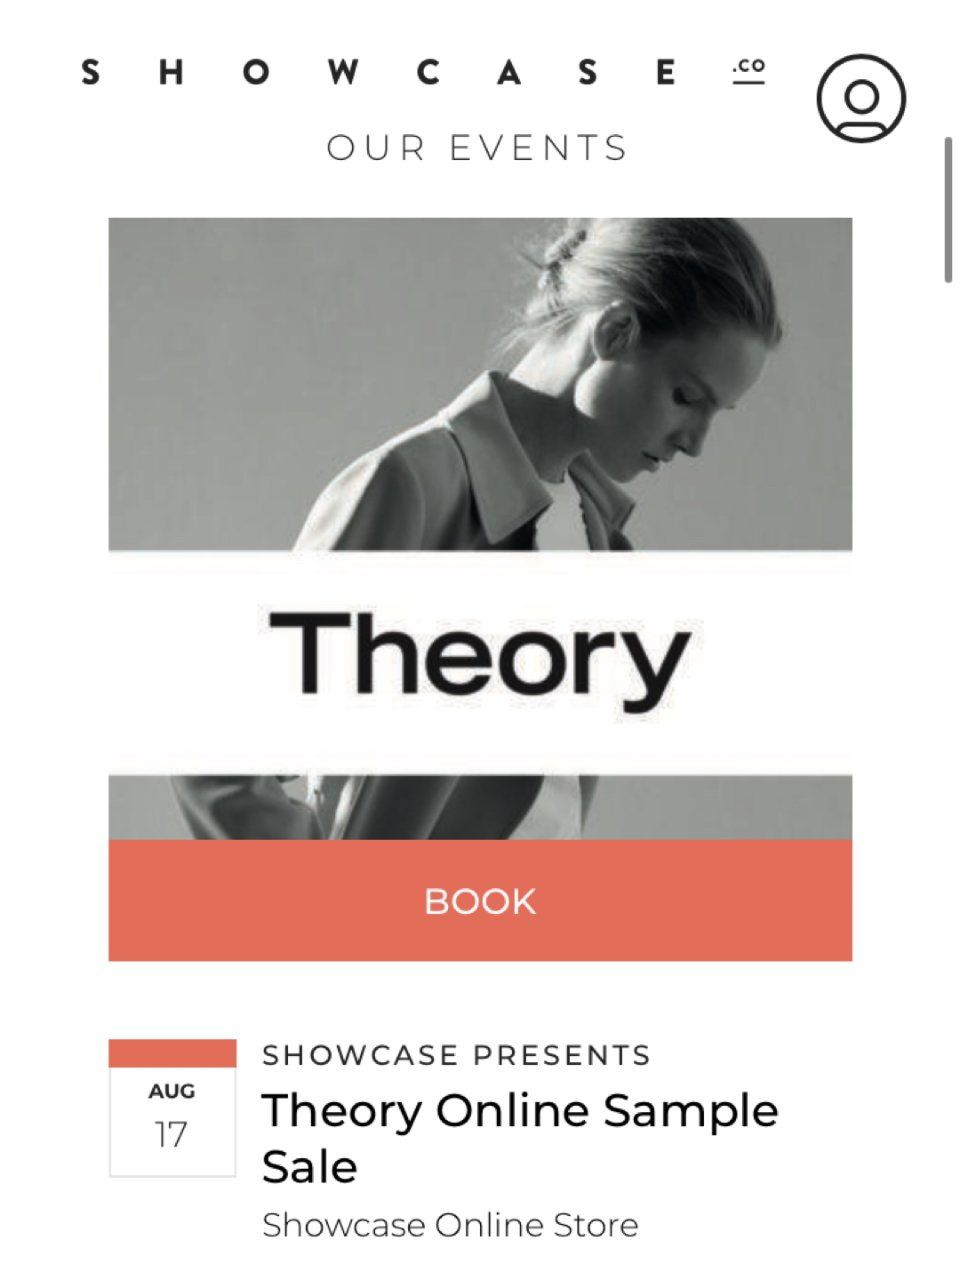 Theory online sample...